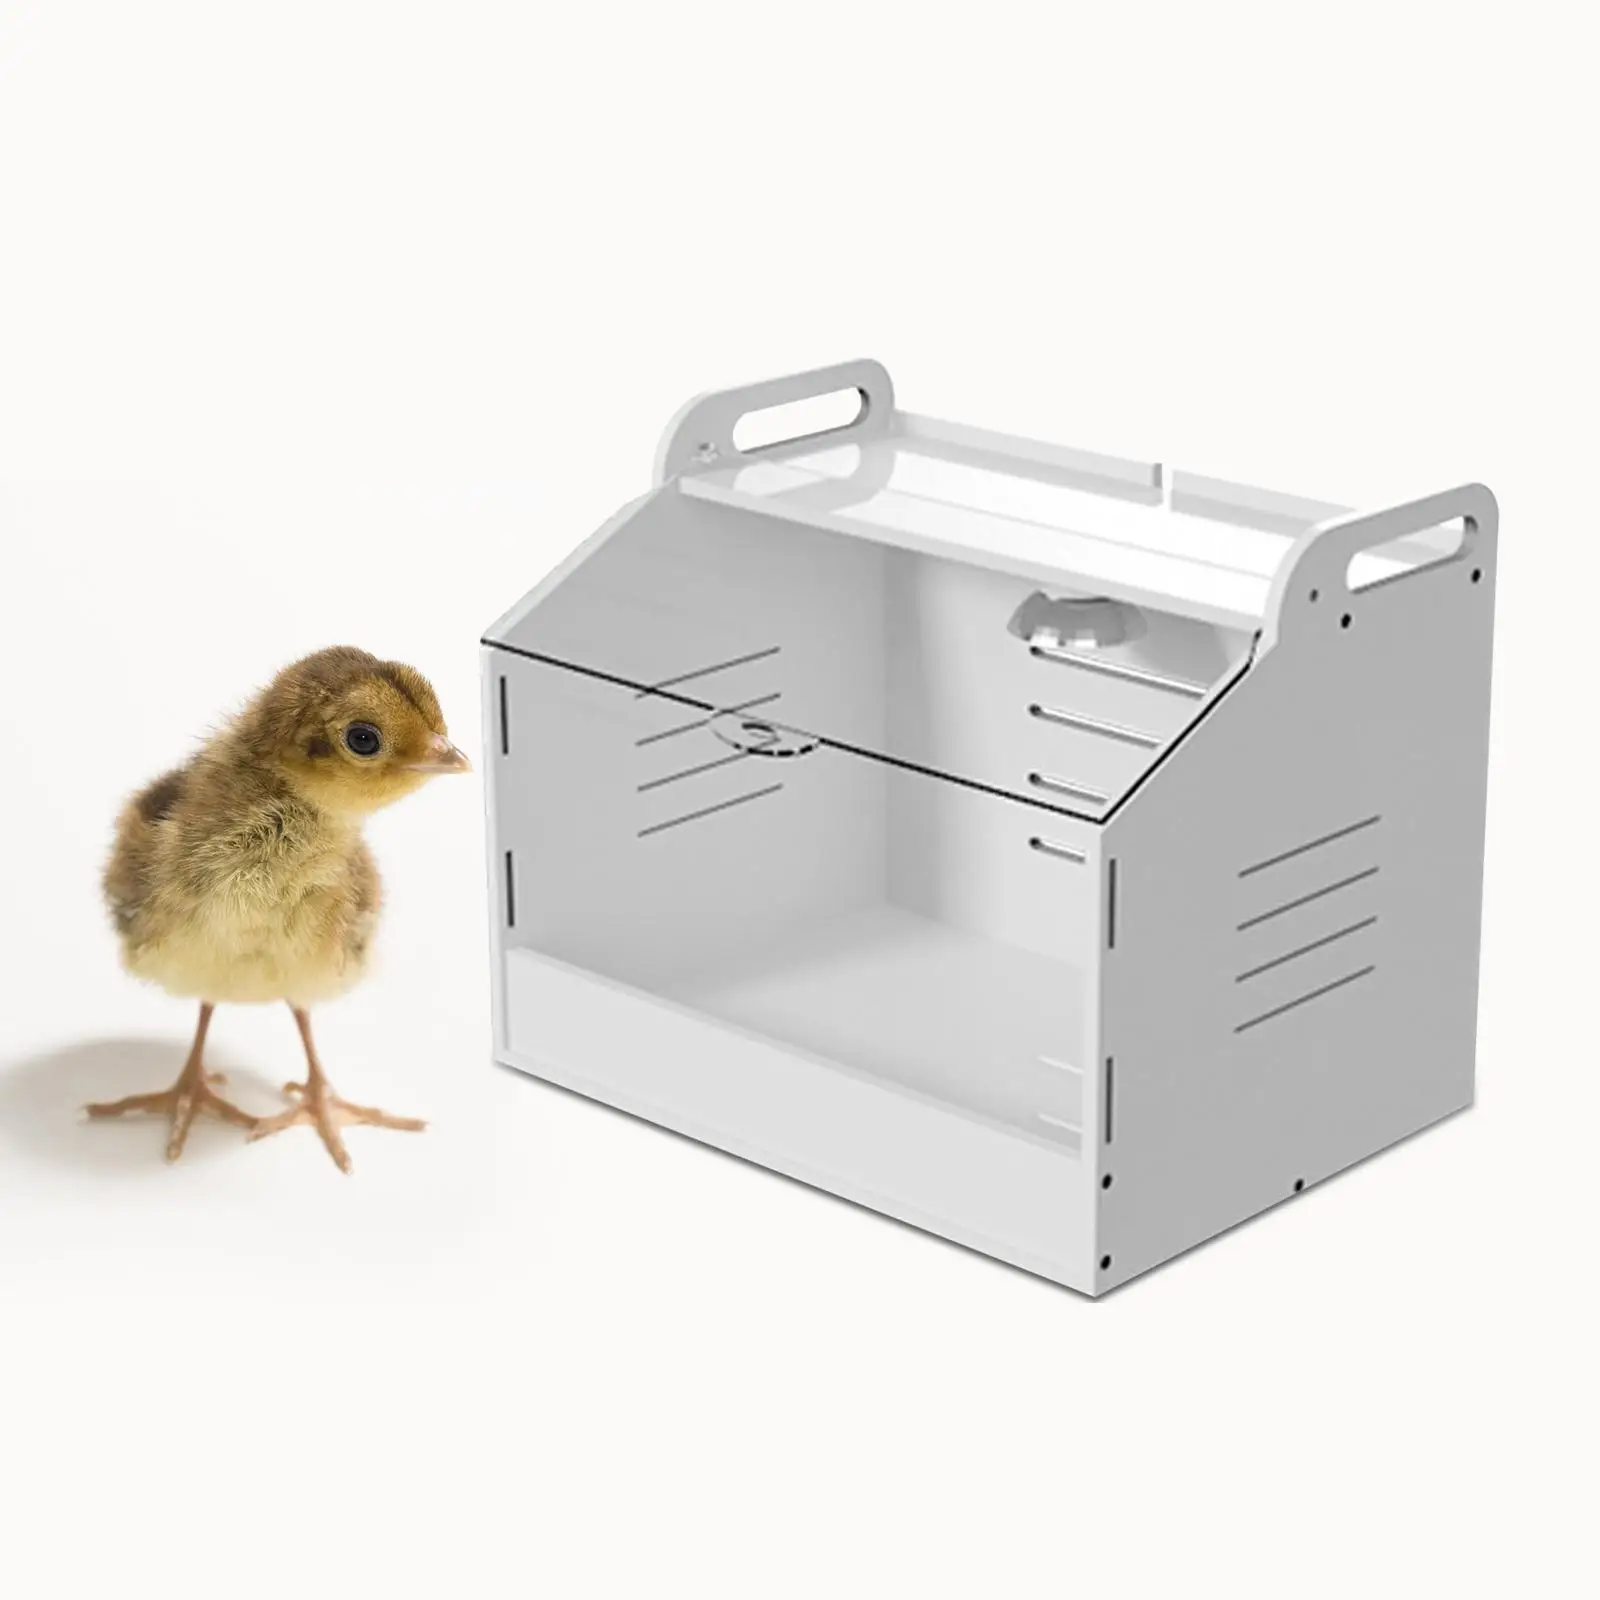 Egg Incubator Hatching Easy Cleaning Clear Top Cover Incubation Box Automatic Poultry Hatcher Machine for Bird Parakeet Chicken